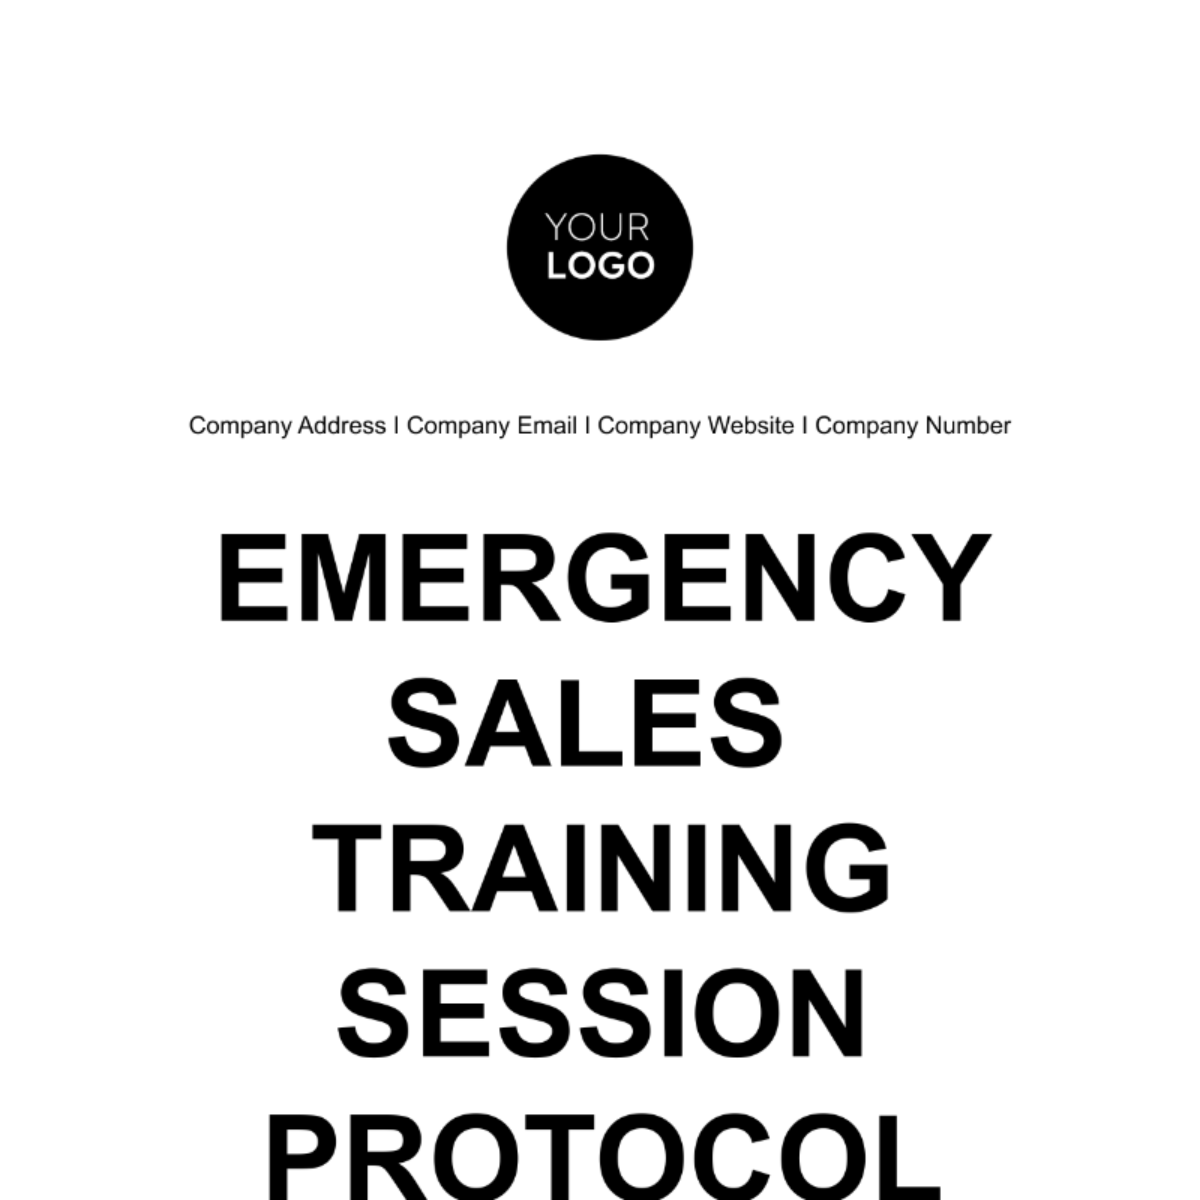 Emergency Sales Training Sessions Protocol Template